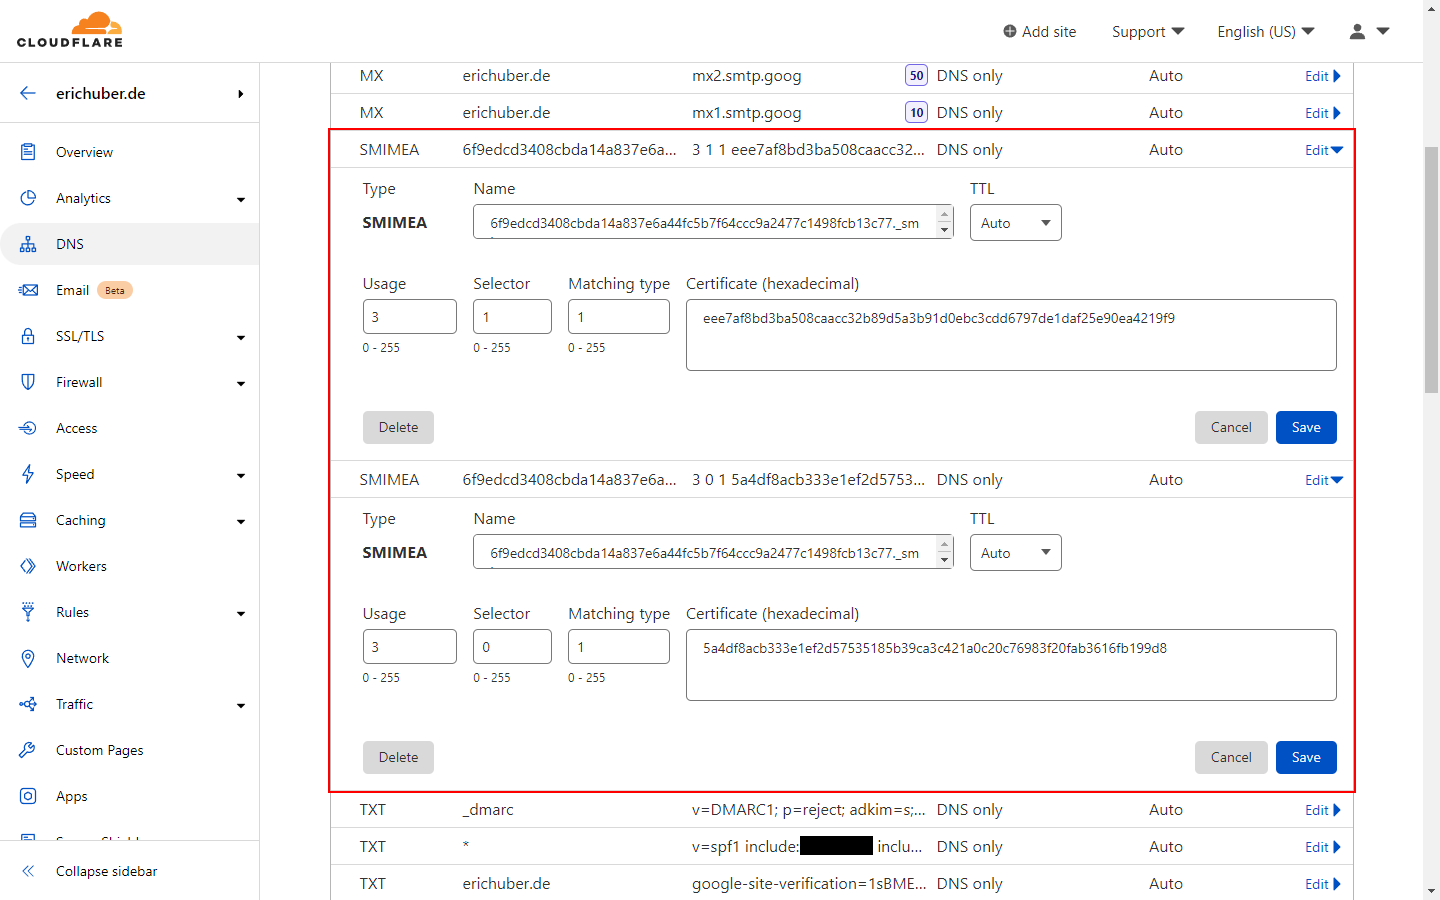 Picture of the Cloudflare Dashboard with two published SMIMEA DNS records showing their configurations